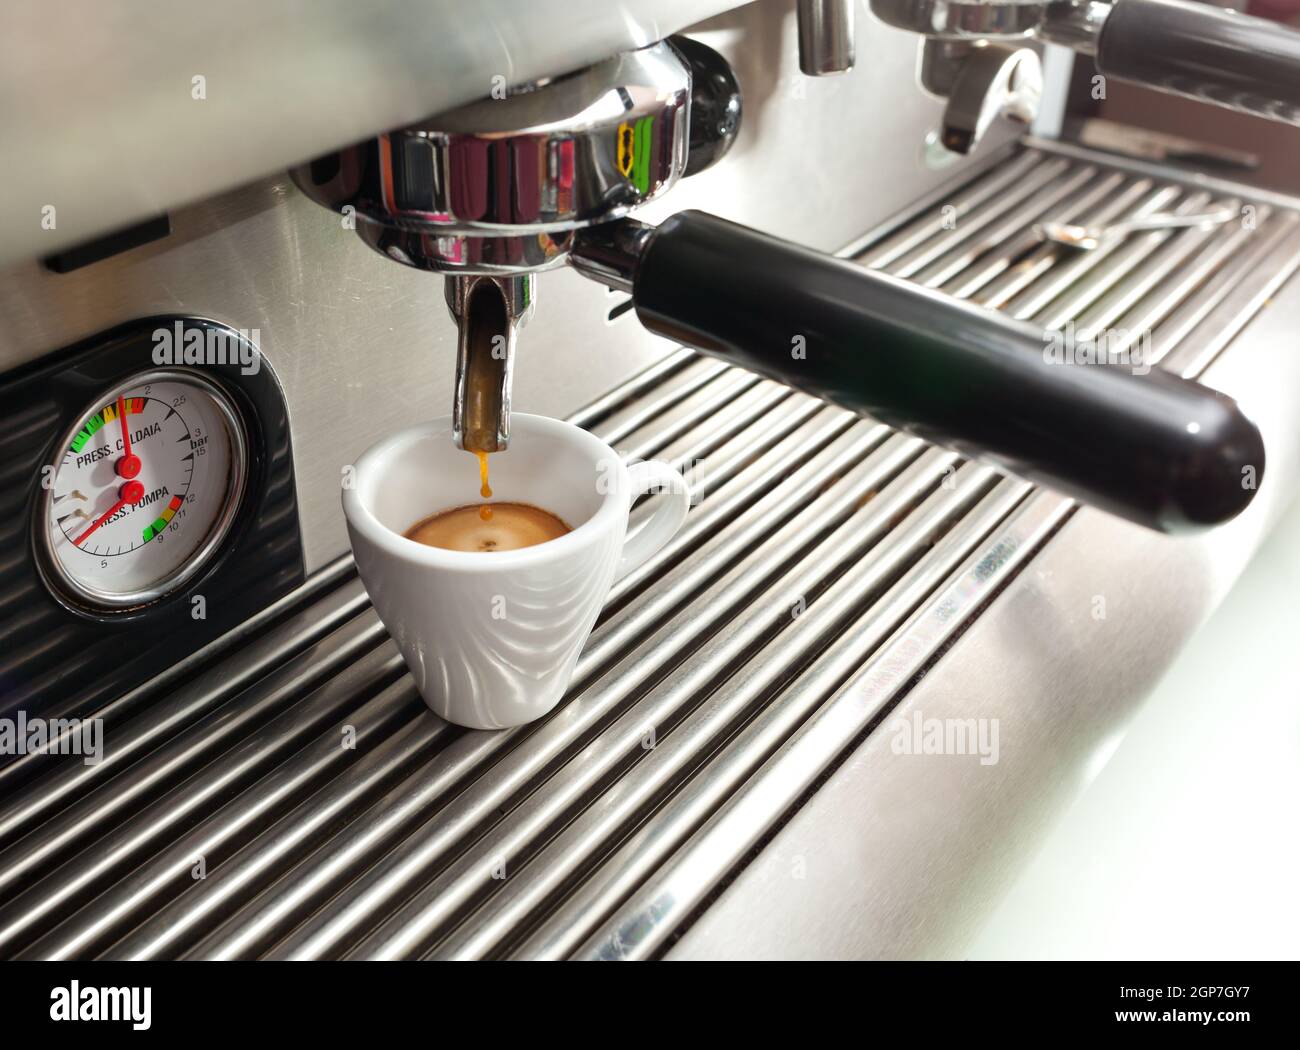 https://c8.alamy.com/comp/2GP7GY7/close-up-of-an-espresso-machine-making-a-cup-of-coffee-2GP7GY7.jpg